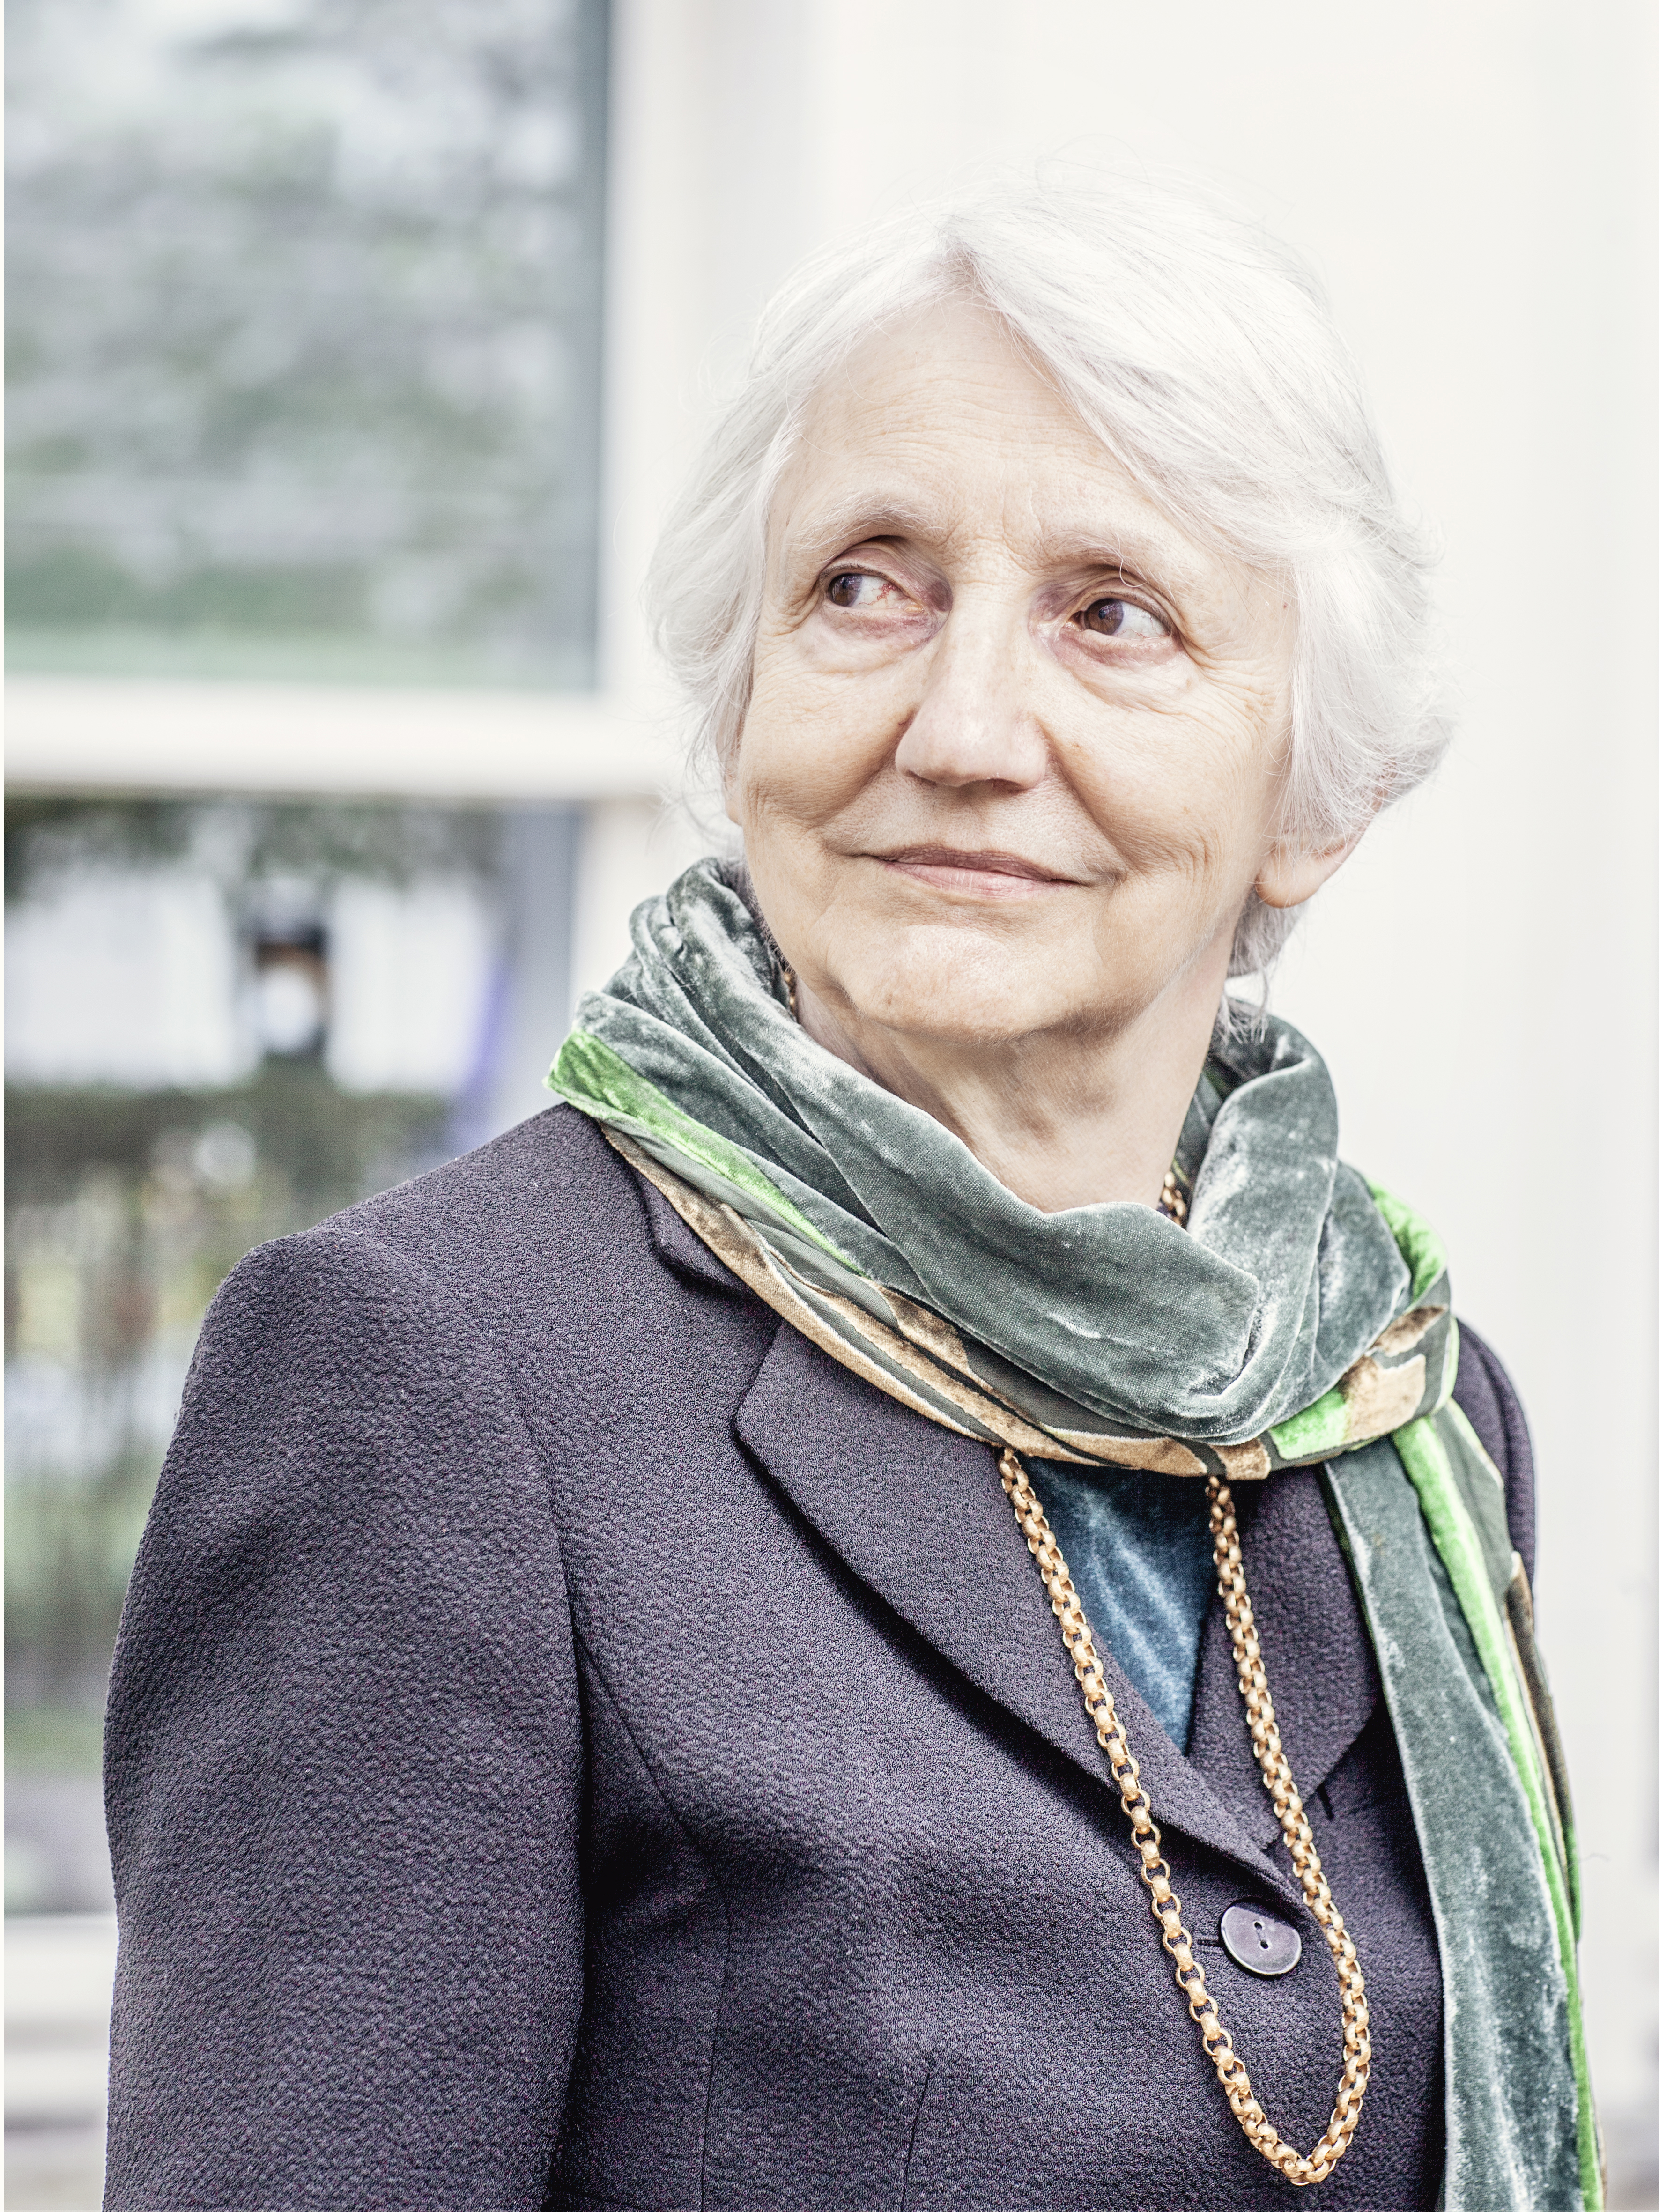 Photo of Onora O'Neill taken by Martin Dijkstra